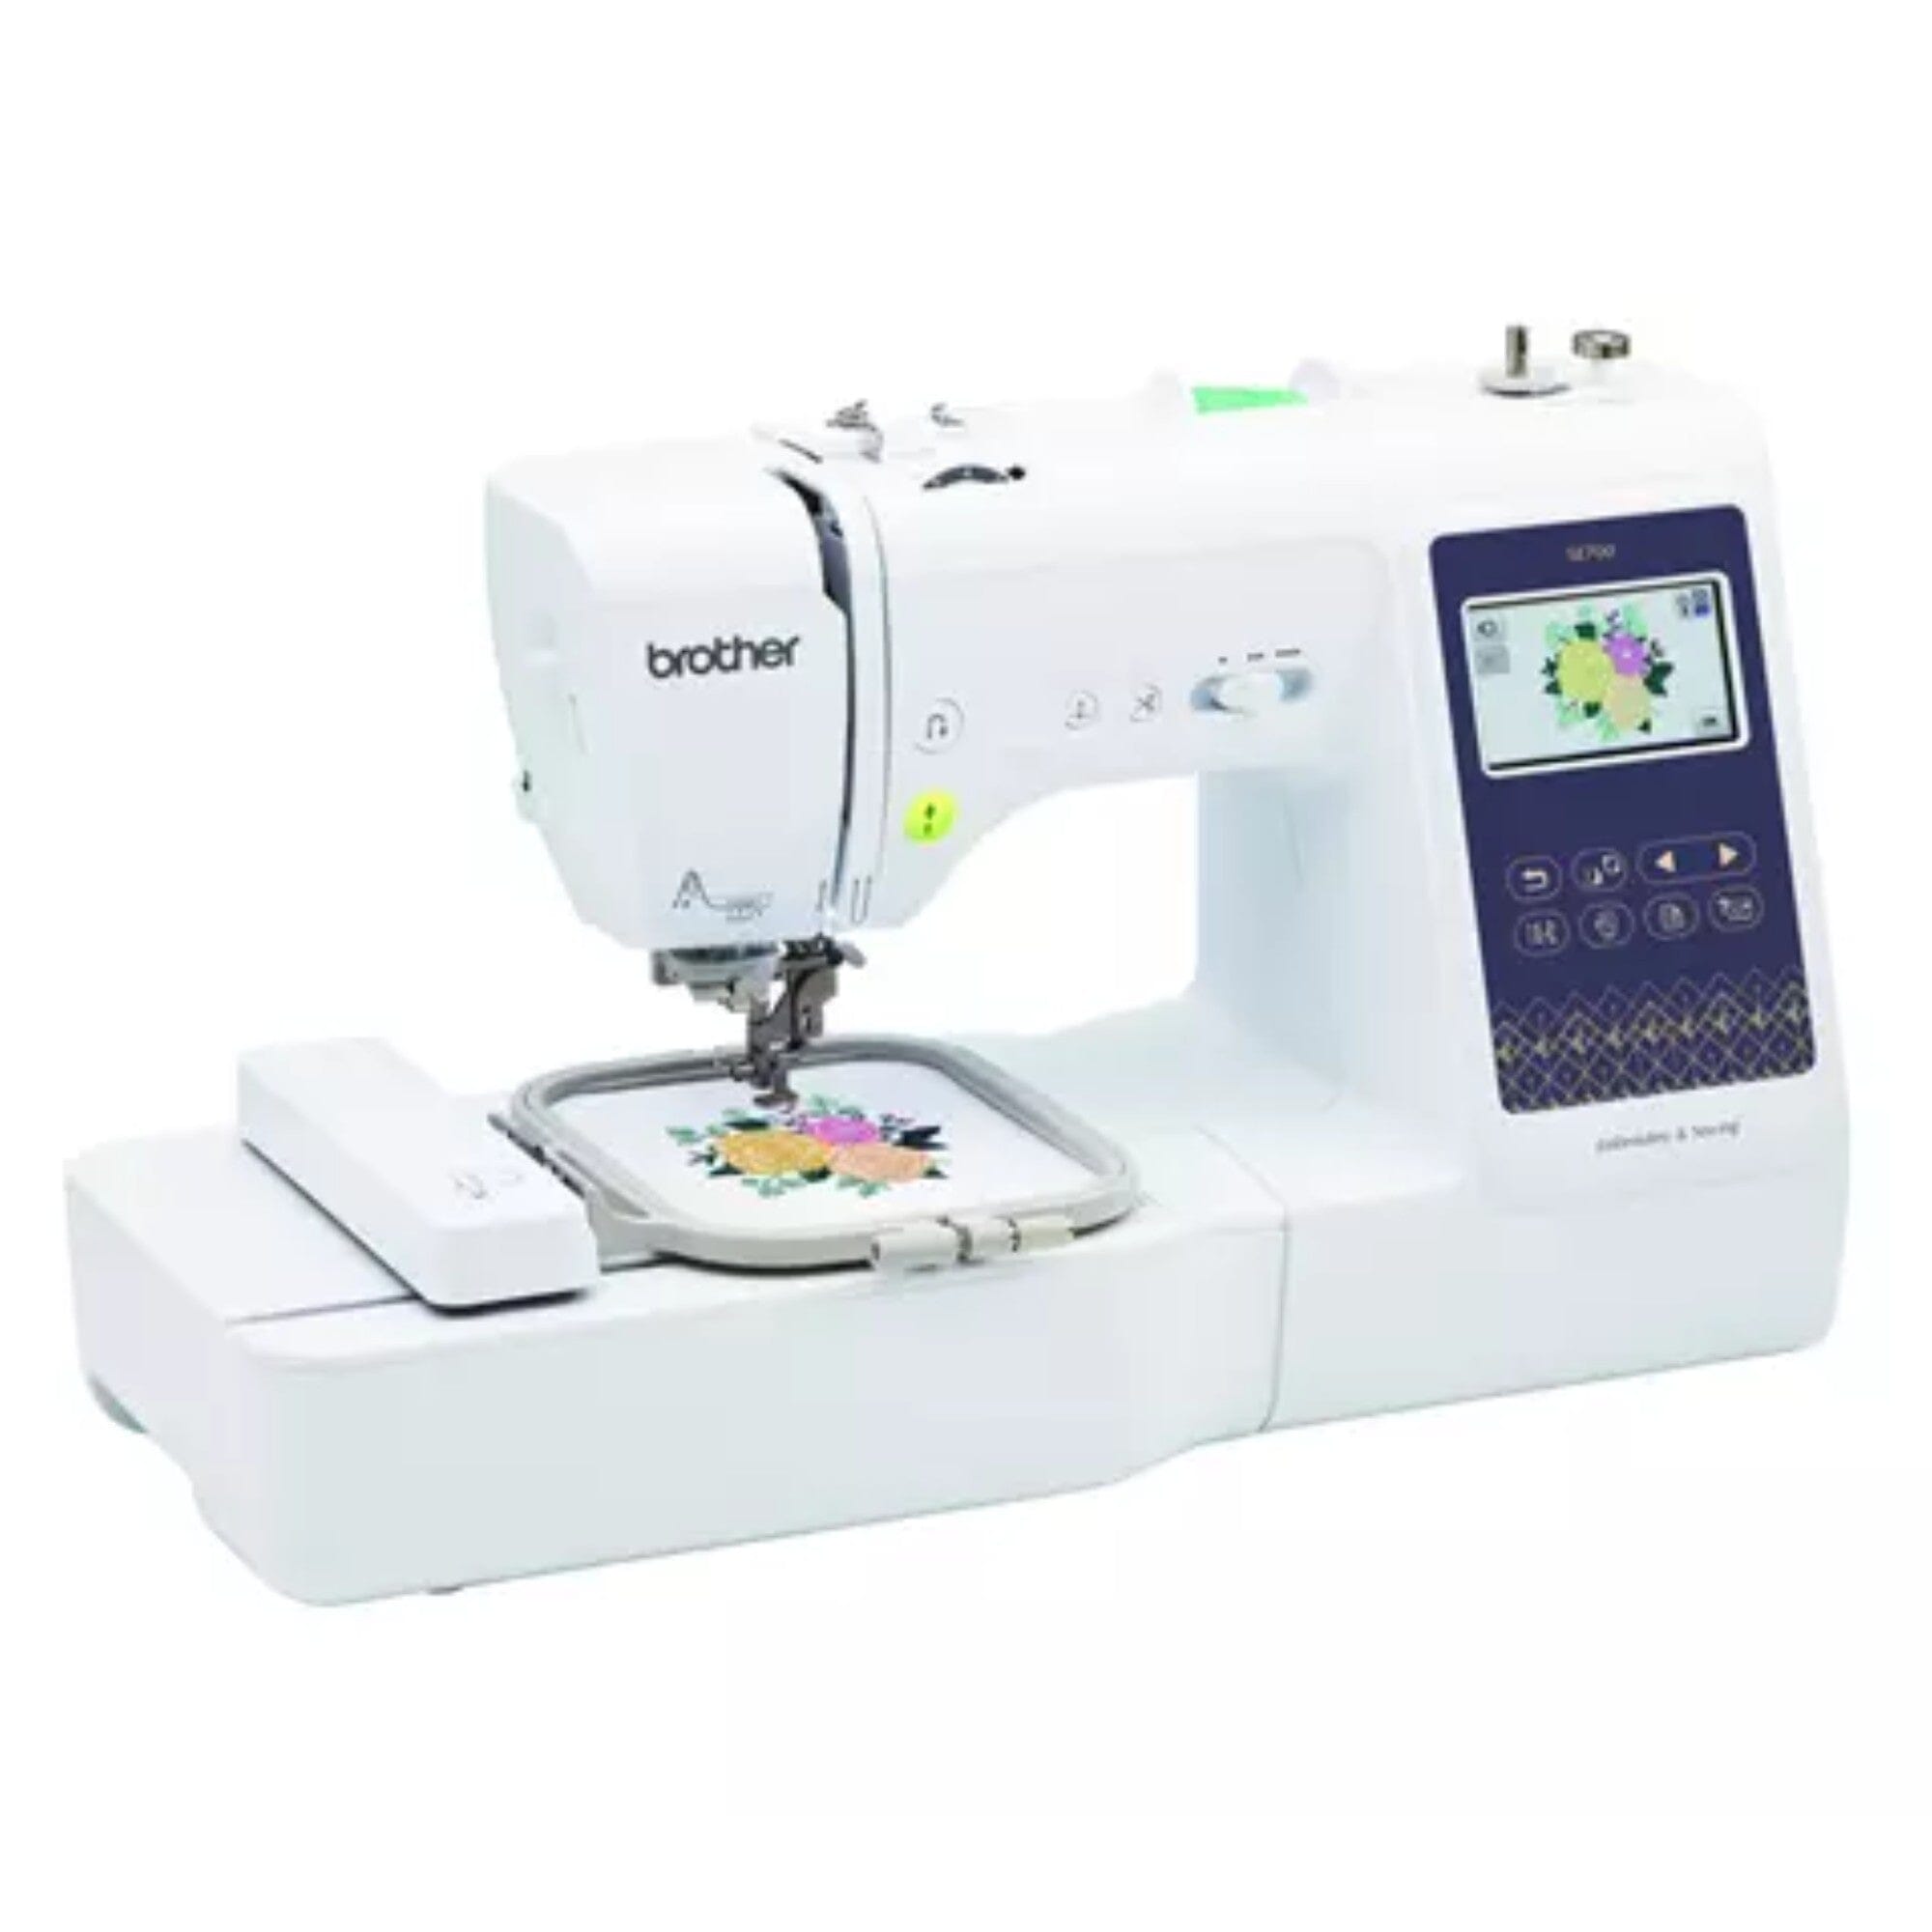 Brother SE700 Sewing & Embroidery 4x4in Machine - Best in Class 